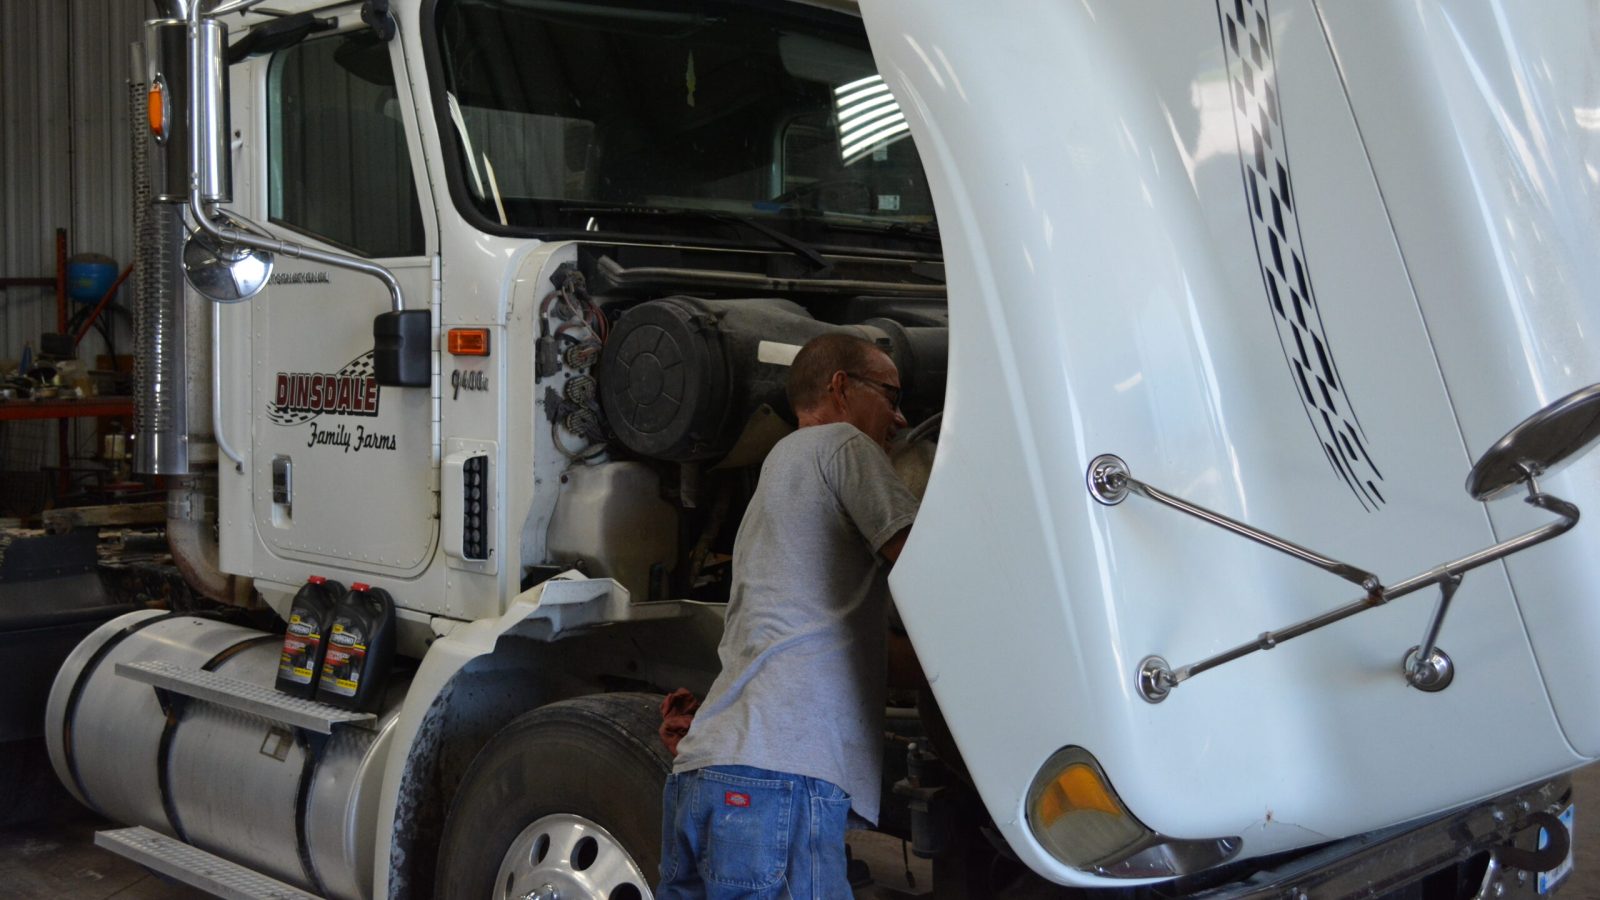 Expert technician from Tony's Tire, Truck & Towing conducting repairs under the hood of a semi truck.